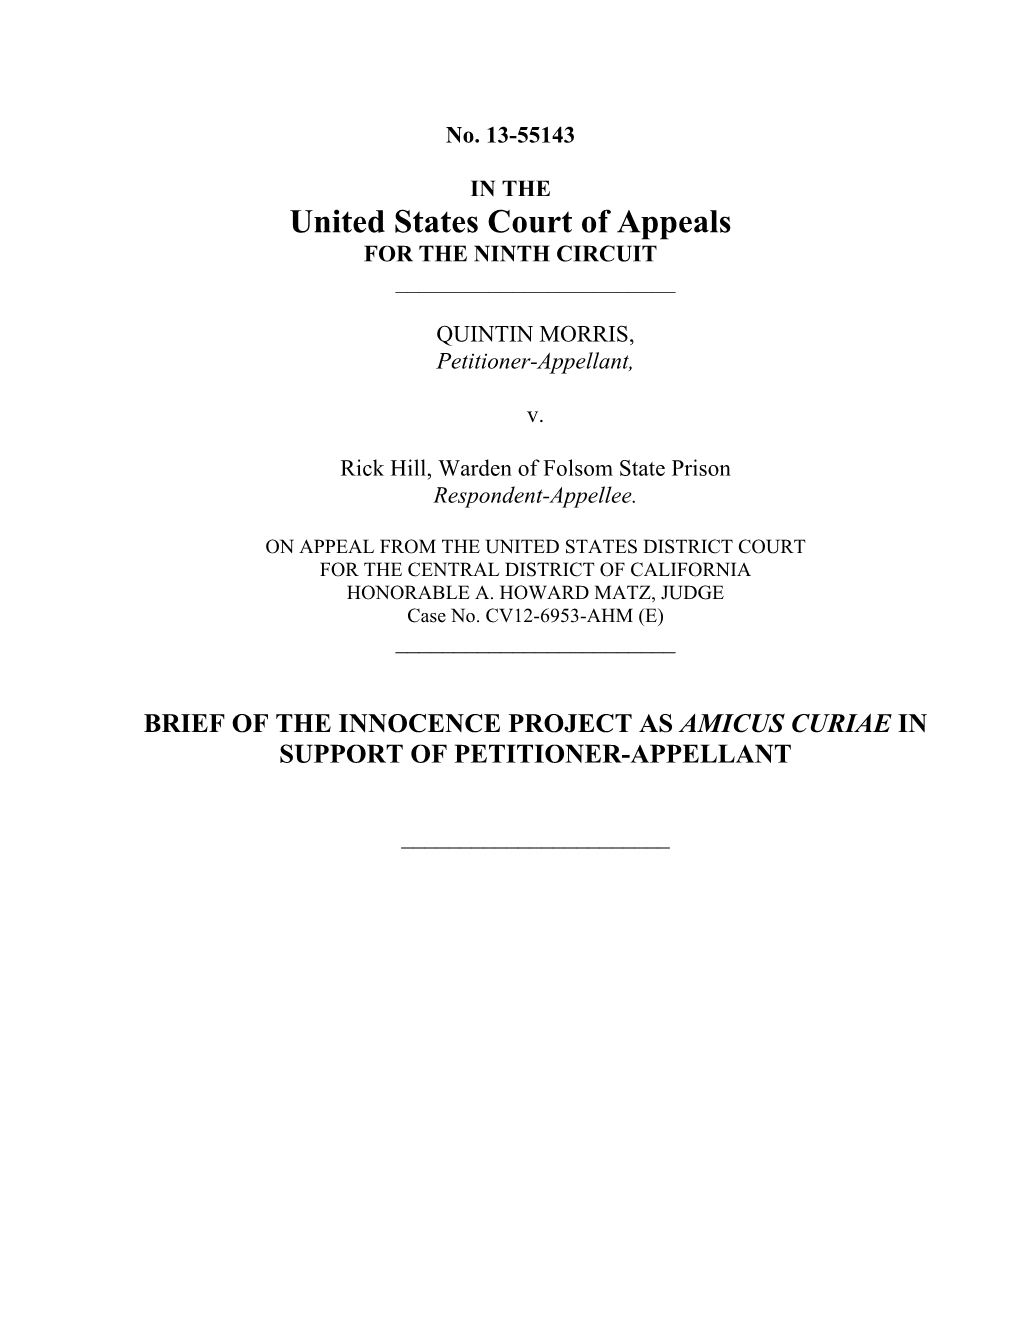 United States Court of Appeals for the NINTH CIRCUIT ______